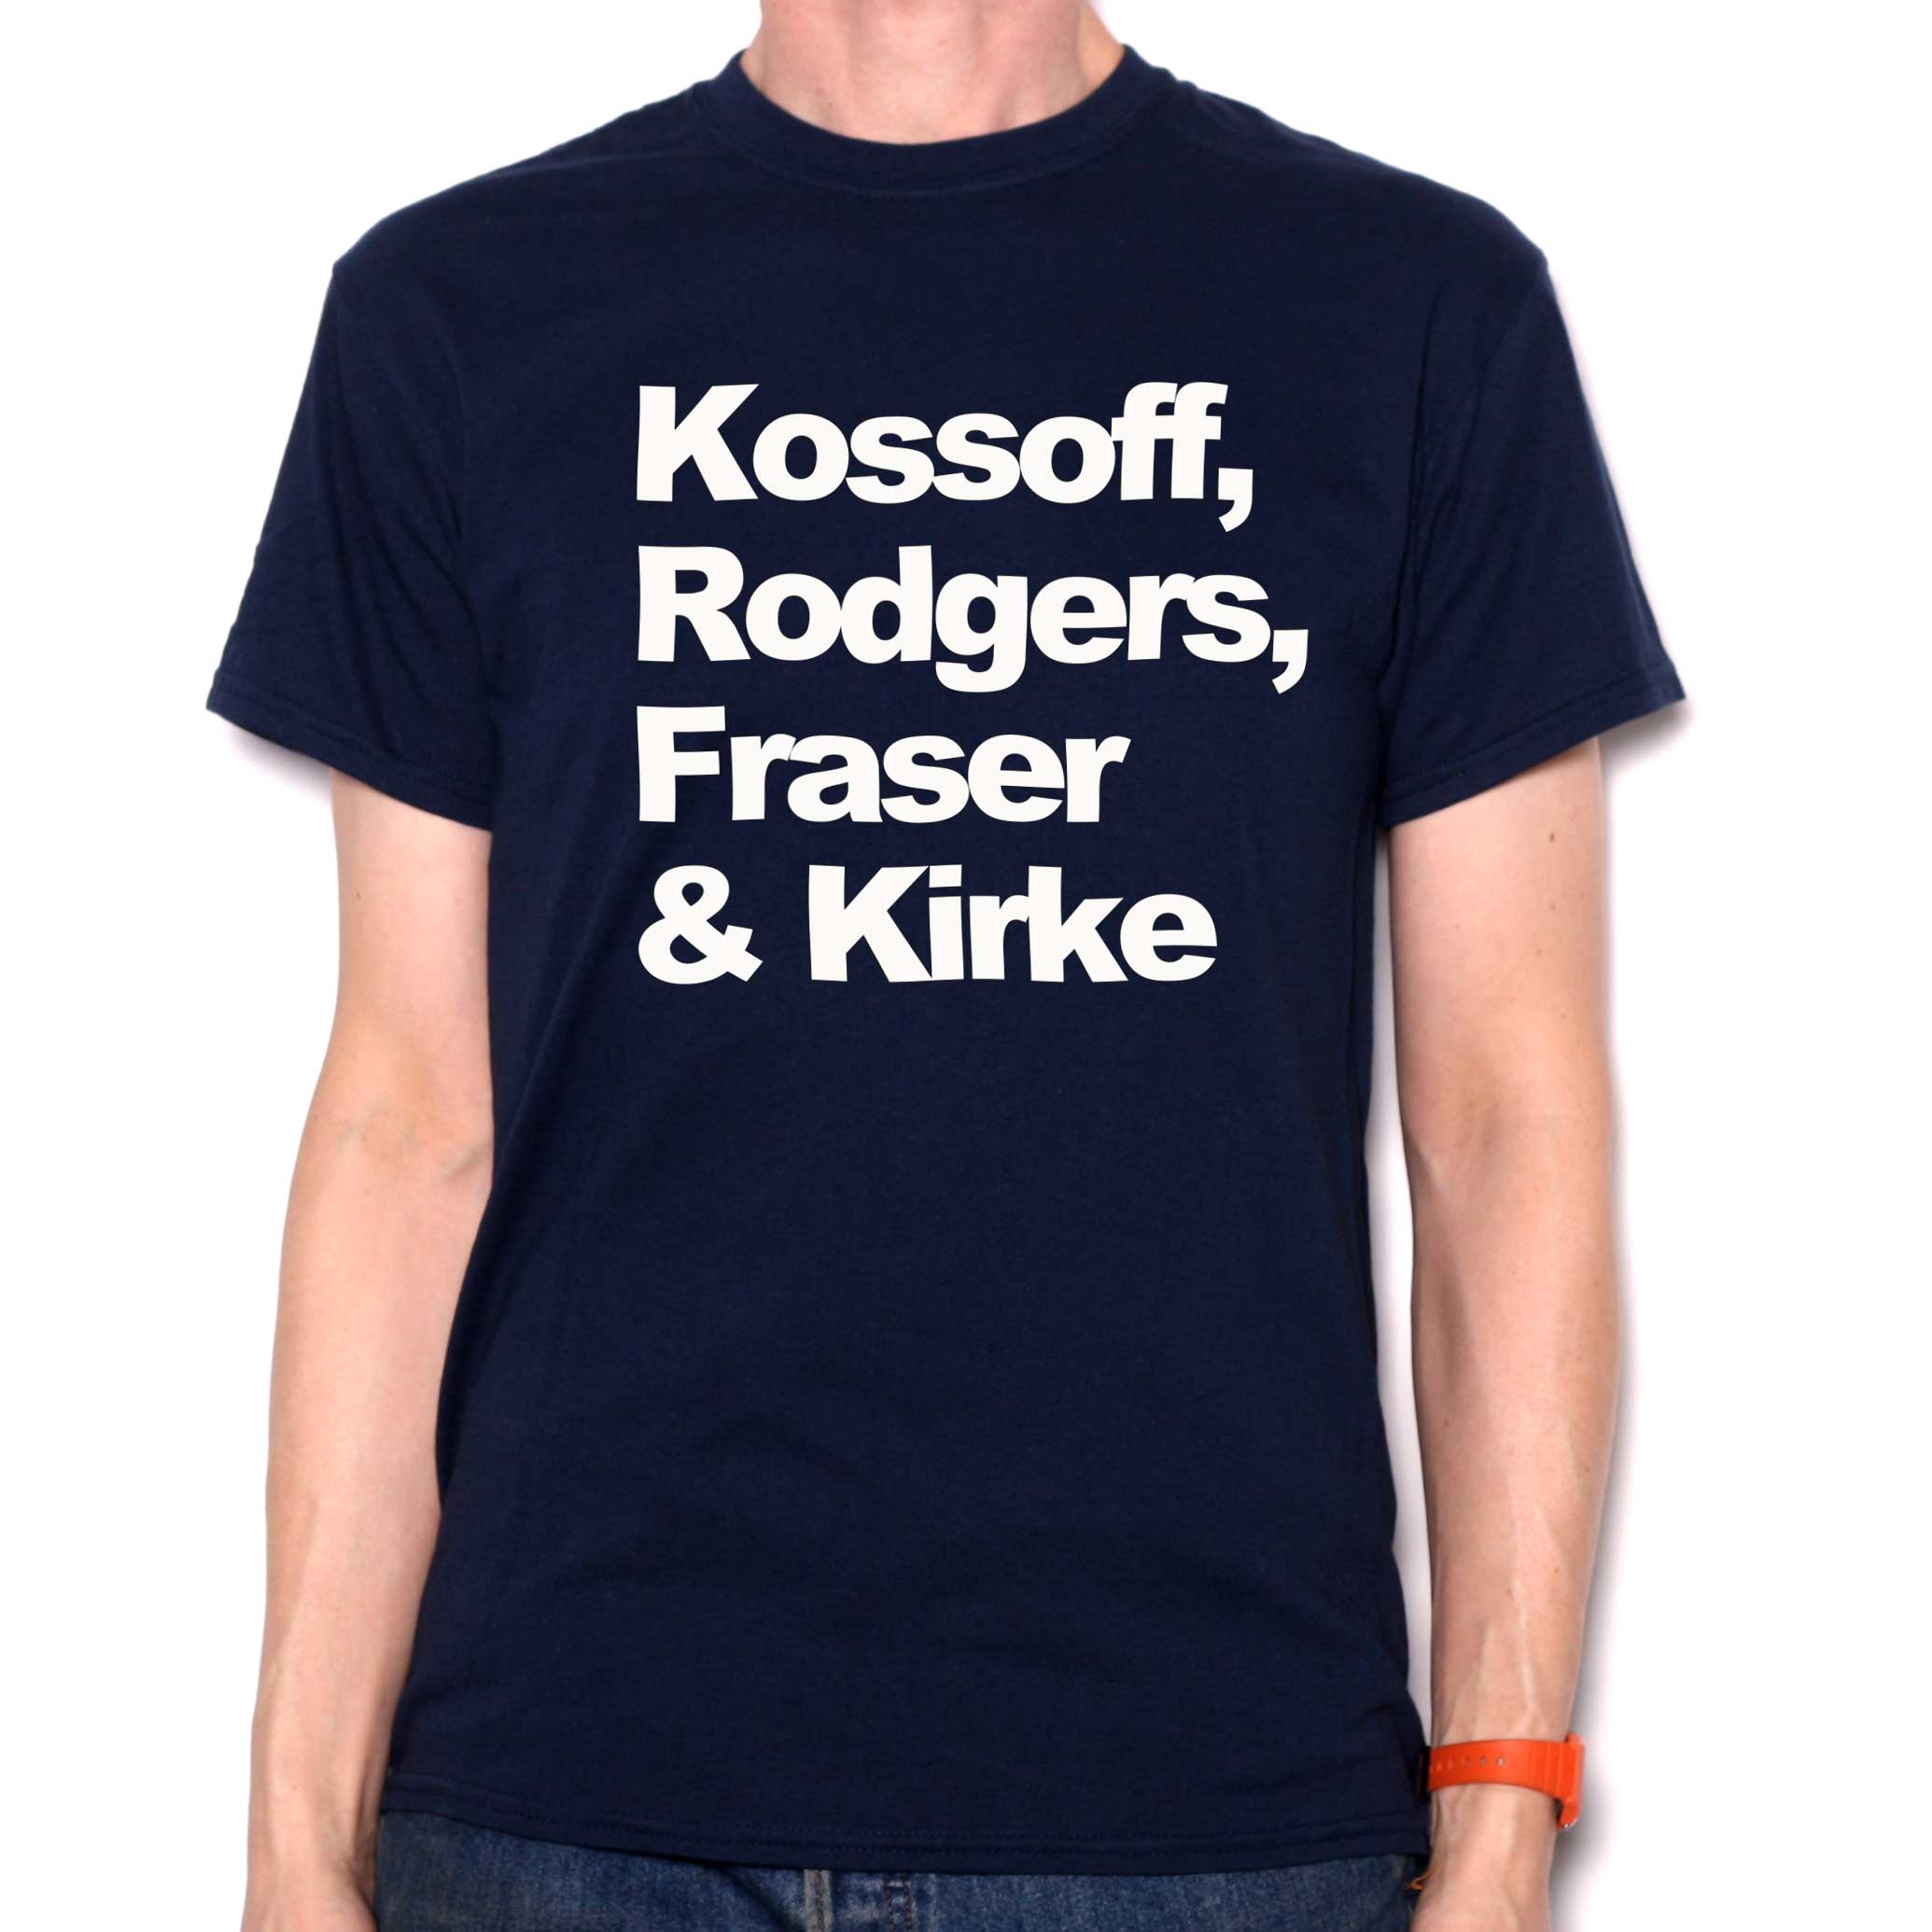 A Tribute to Free T shirt - Kossoff, Rodgers, Fraser & Kirke